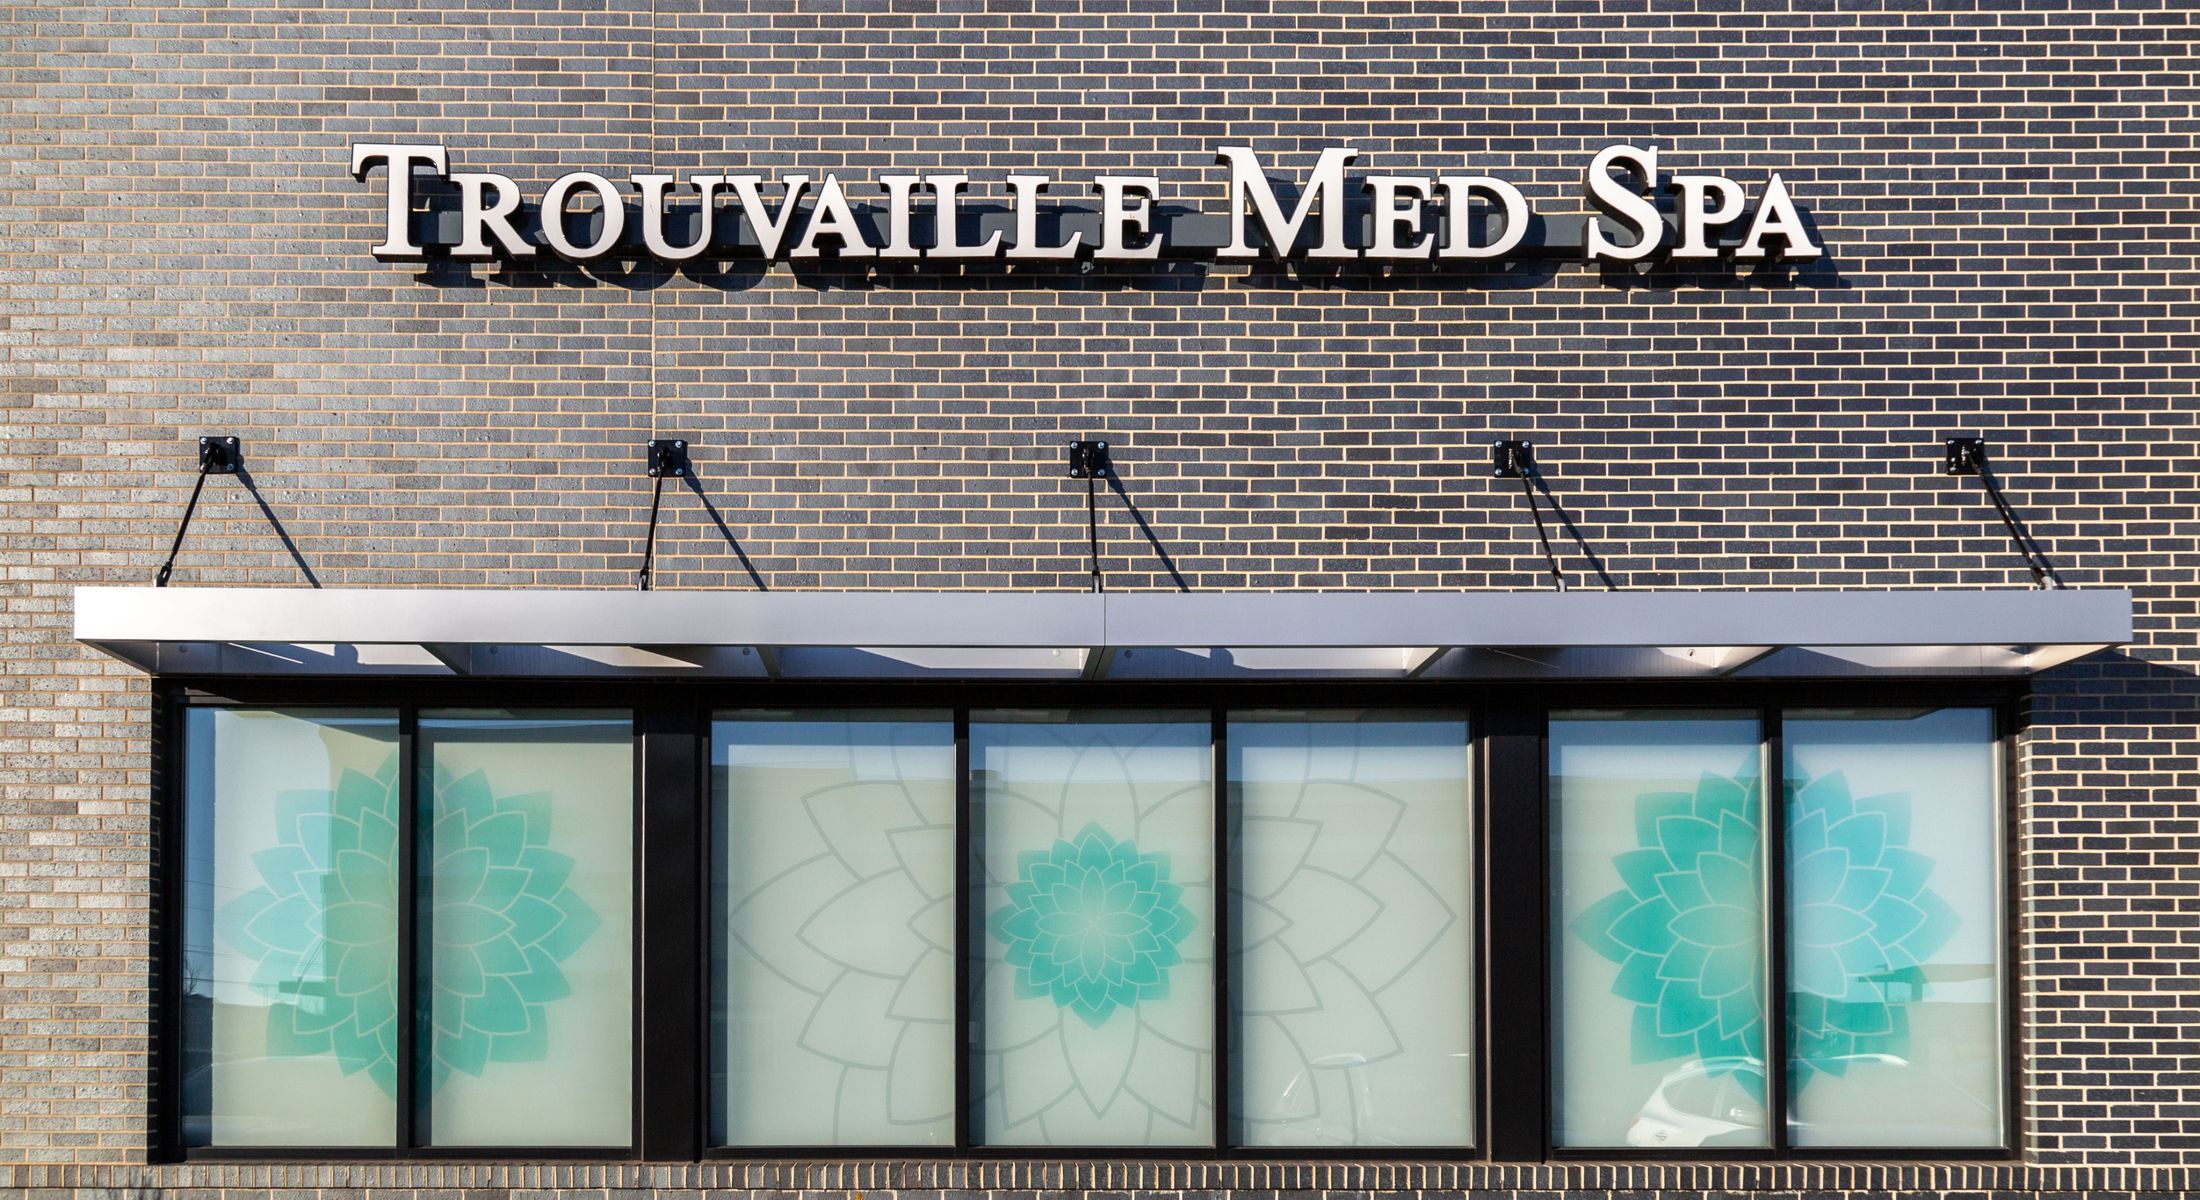 Trouvaille Med Spa exterior